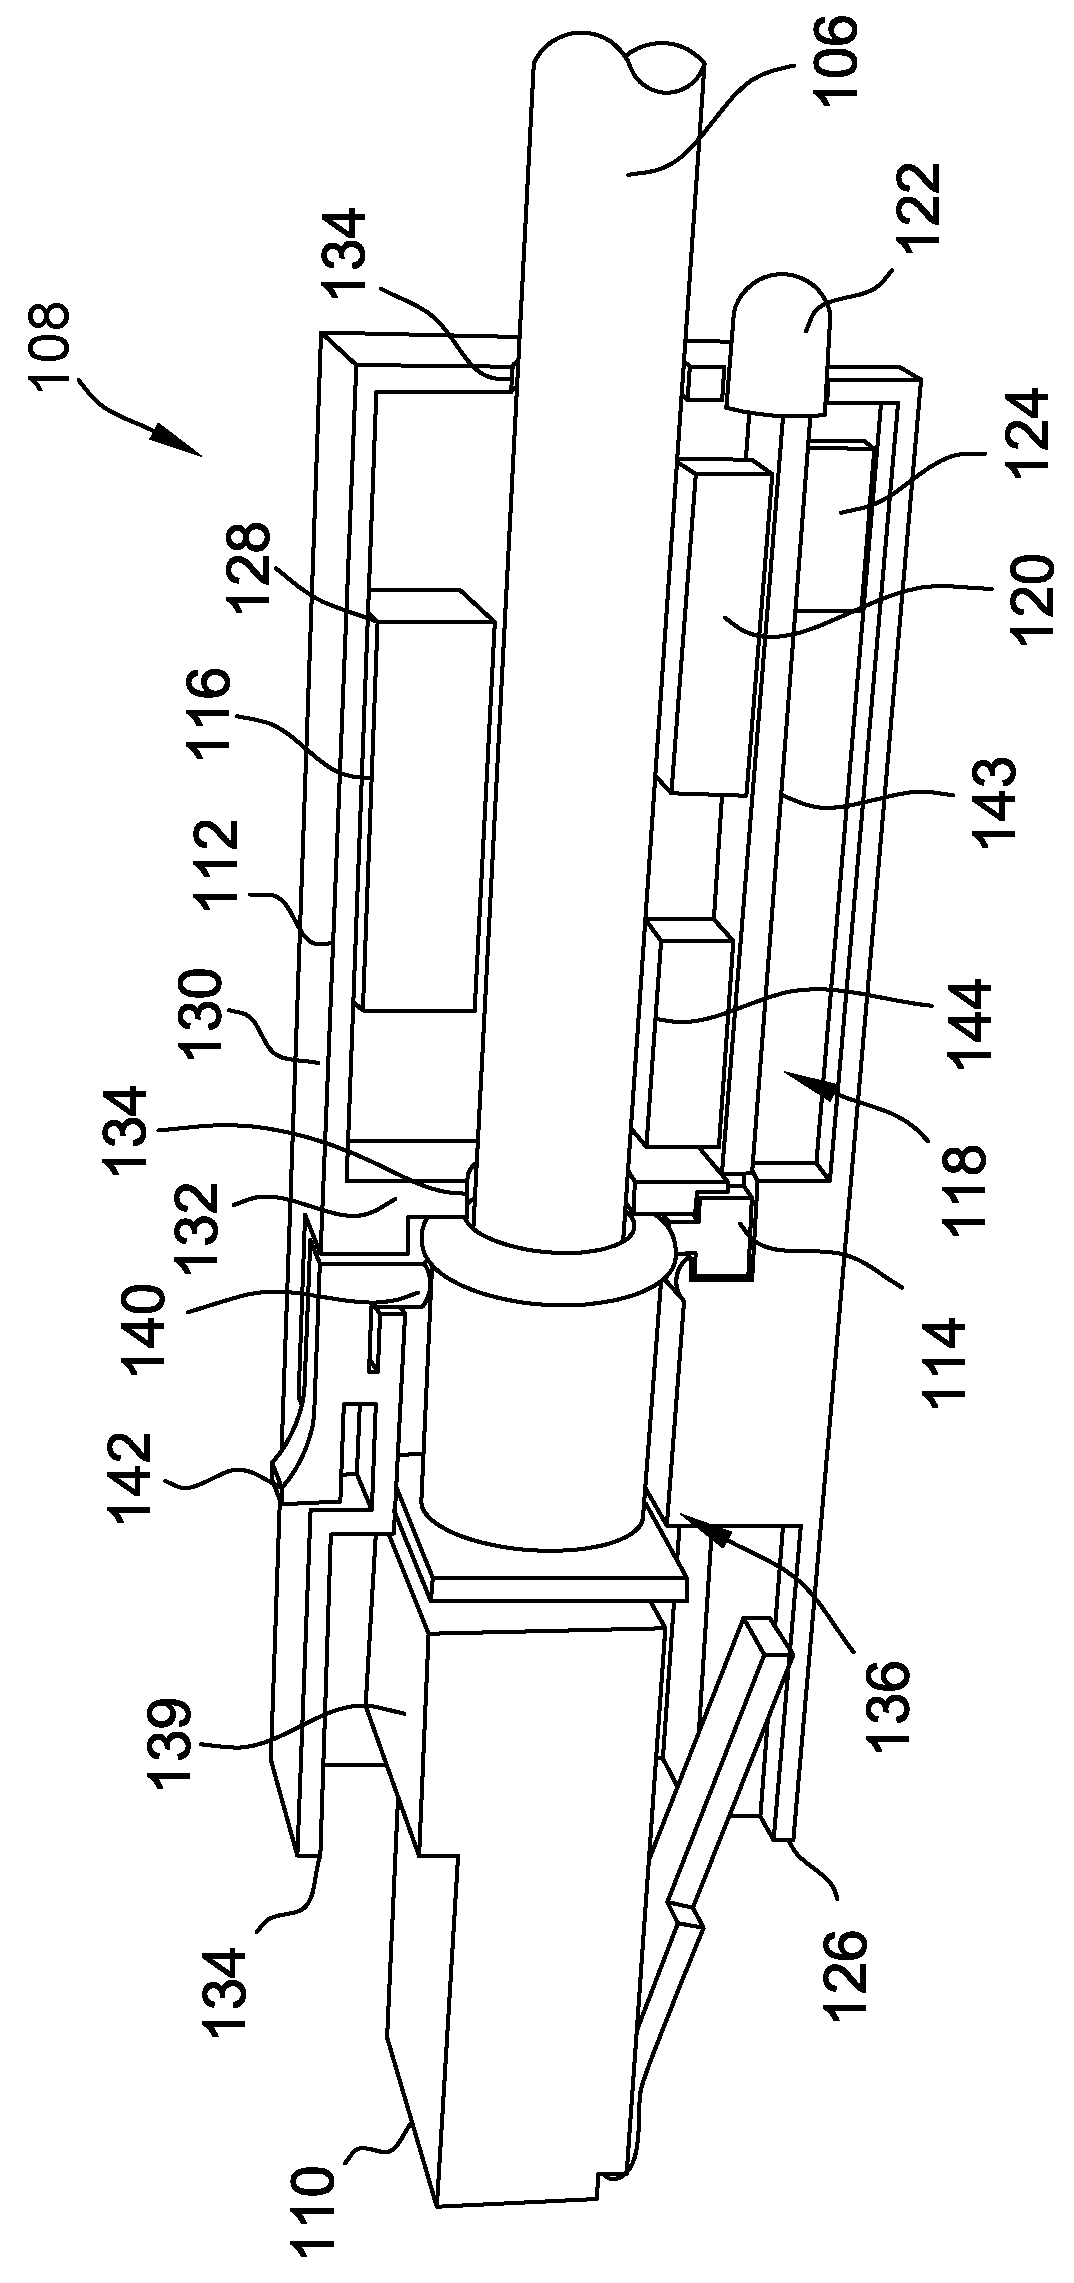 Port security device for computing devices and methods of operating such